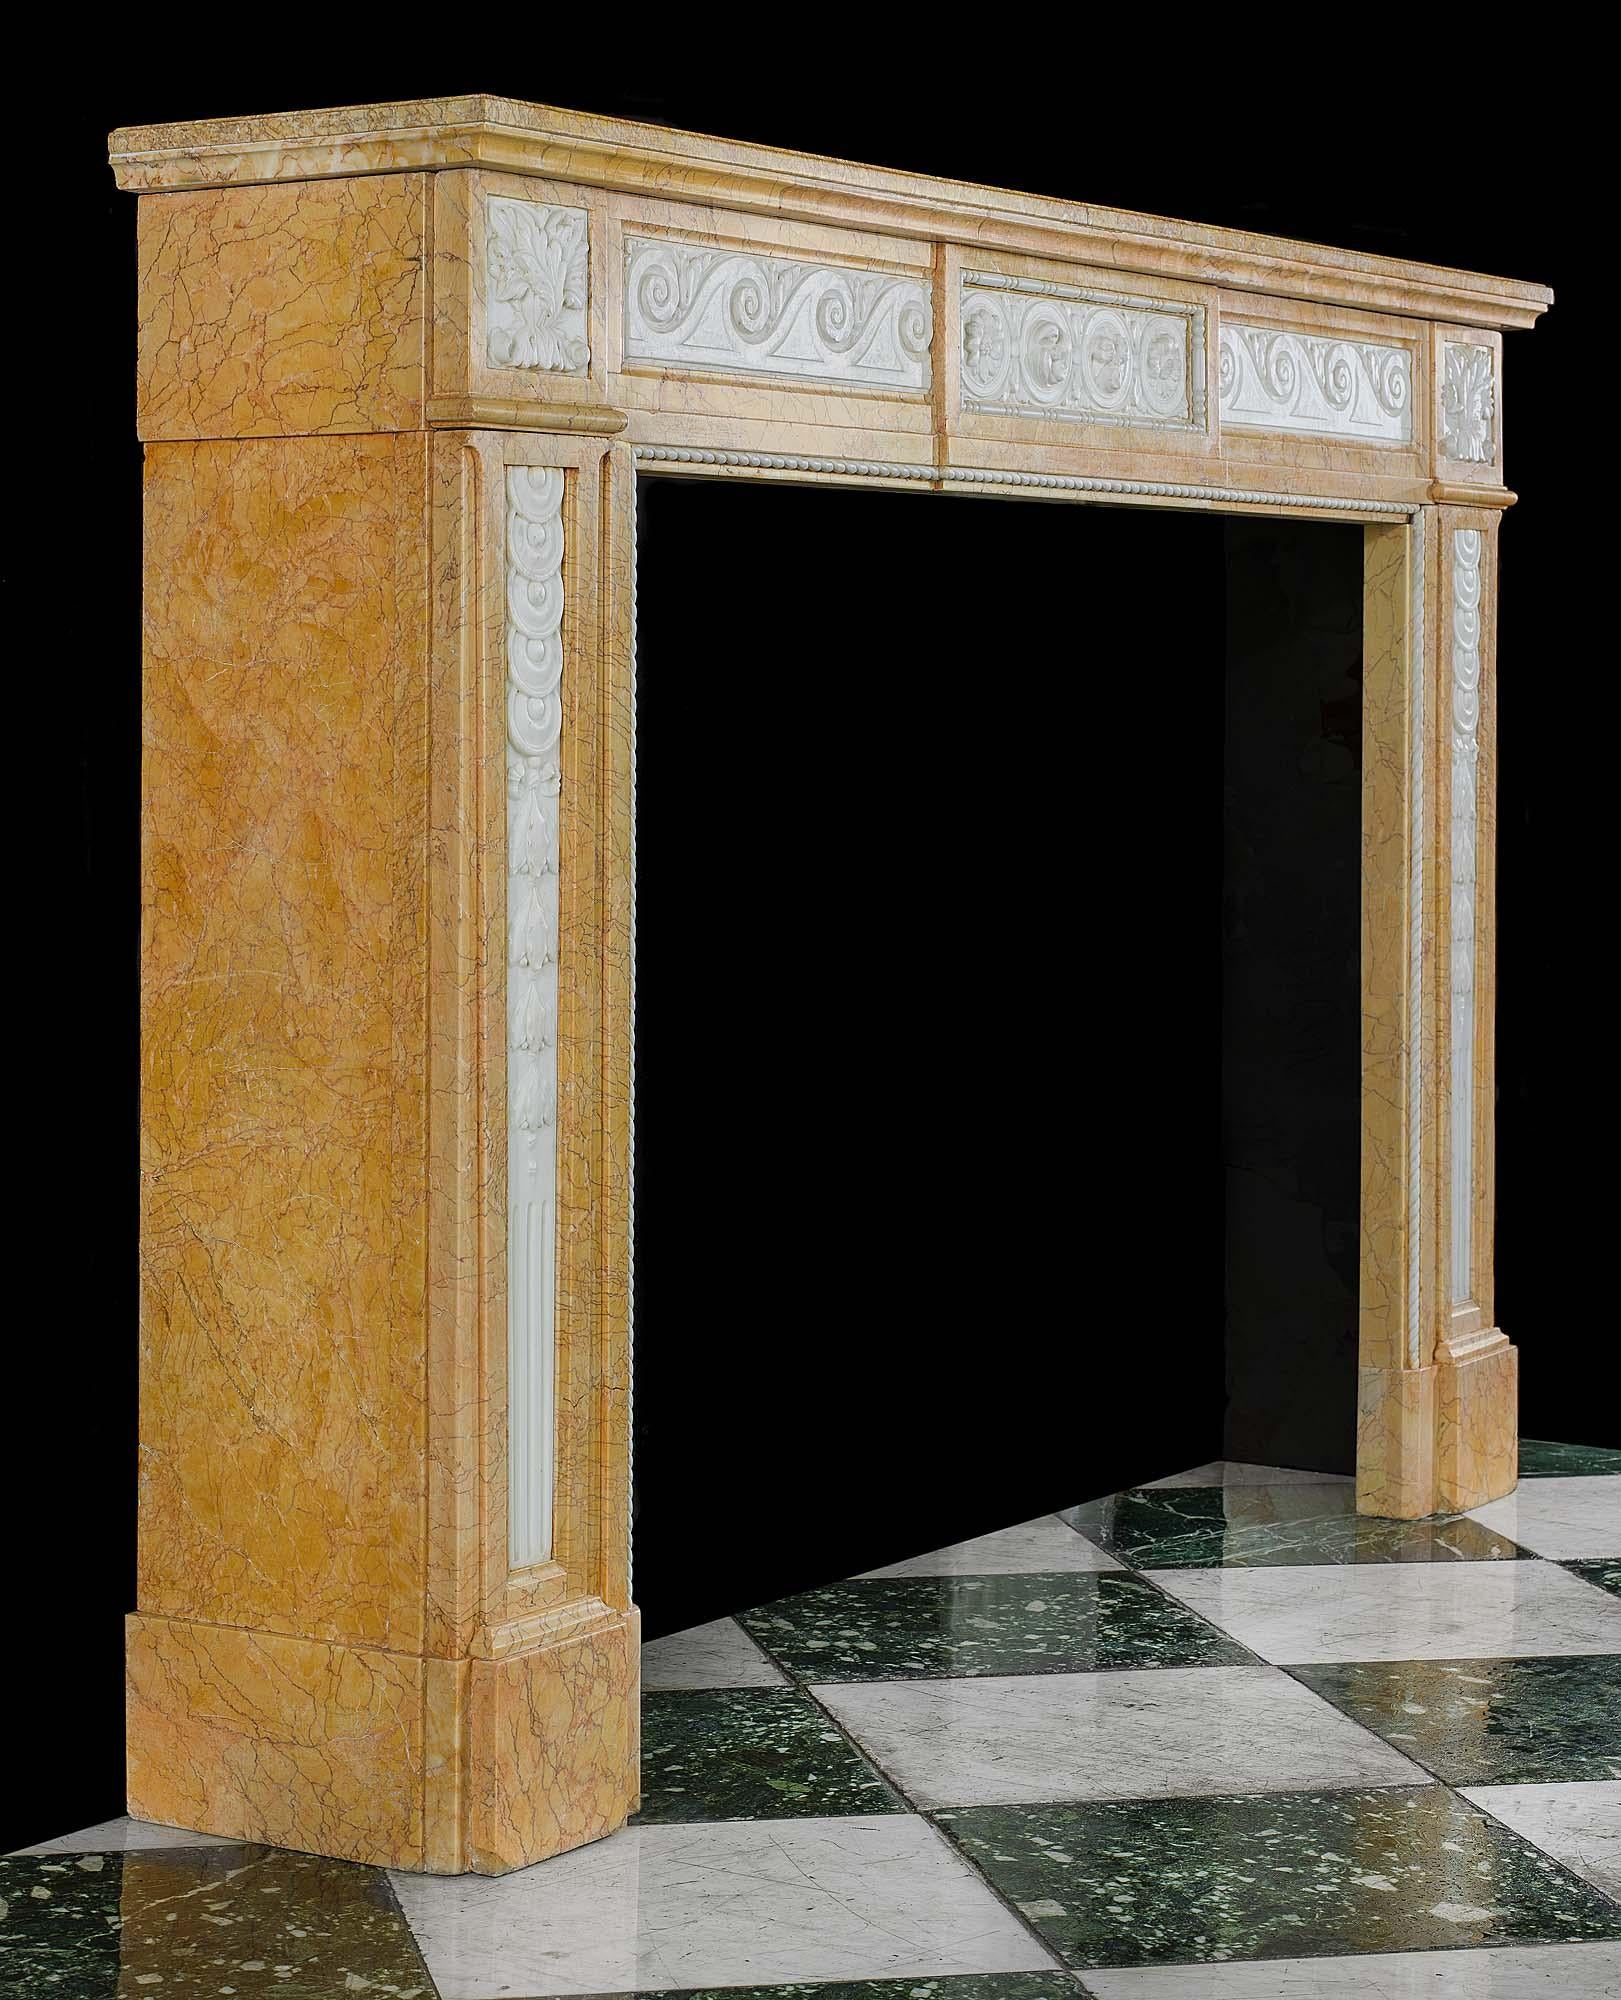 A Louis XVI style antique chimneypiece carved in Statuary and Crema Valencia marbles. The frieze, with rows of vitruvian scrolls and a central panel of stylised rosettes in a beaded frame, is flanked by square foliate endblocks above jambs with